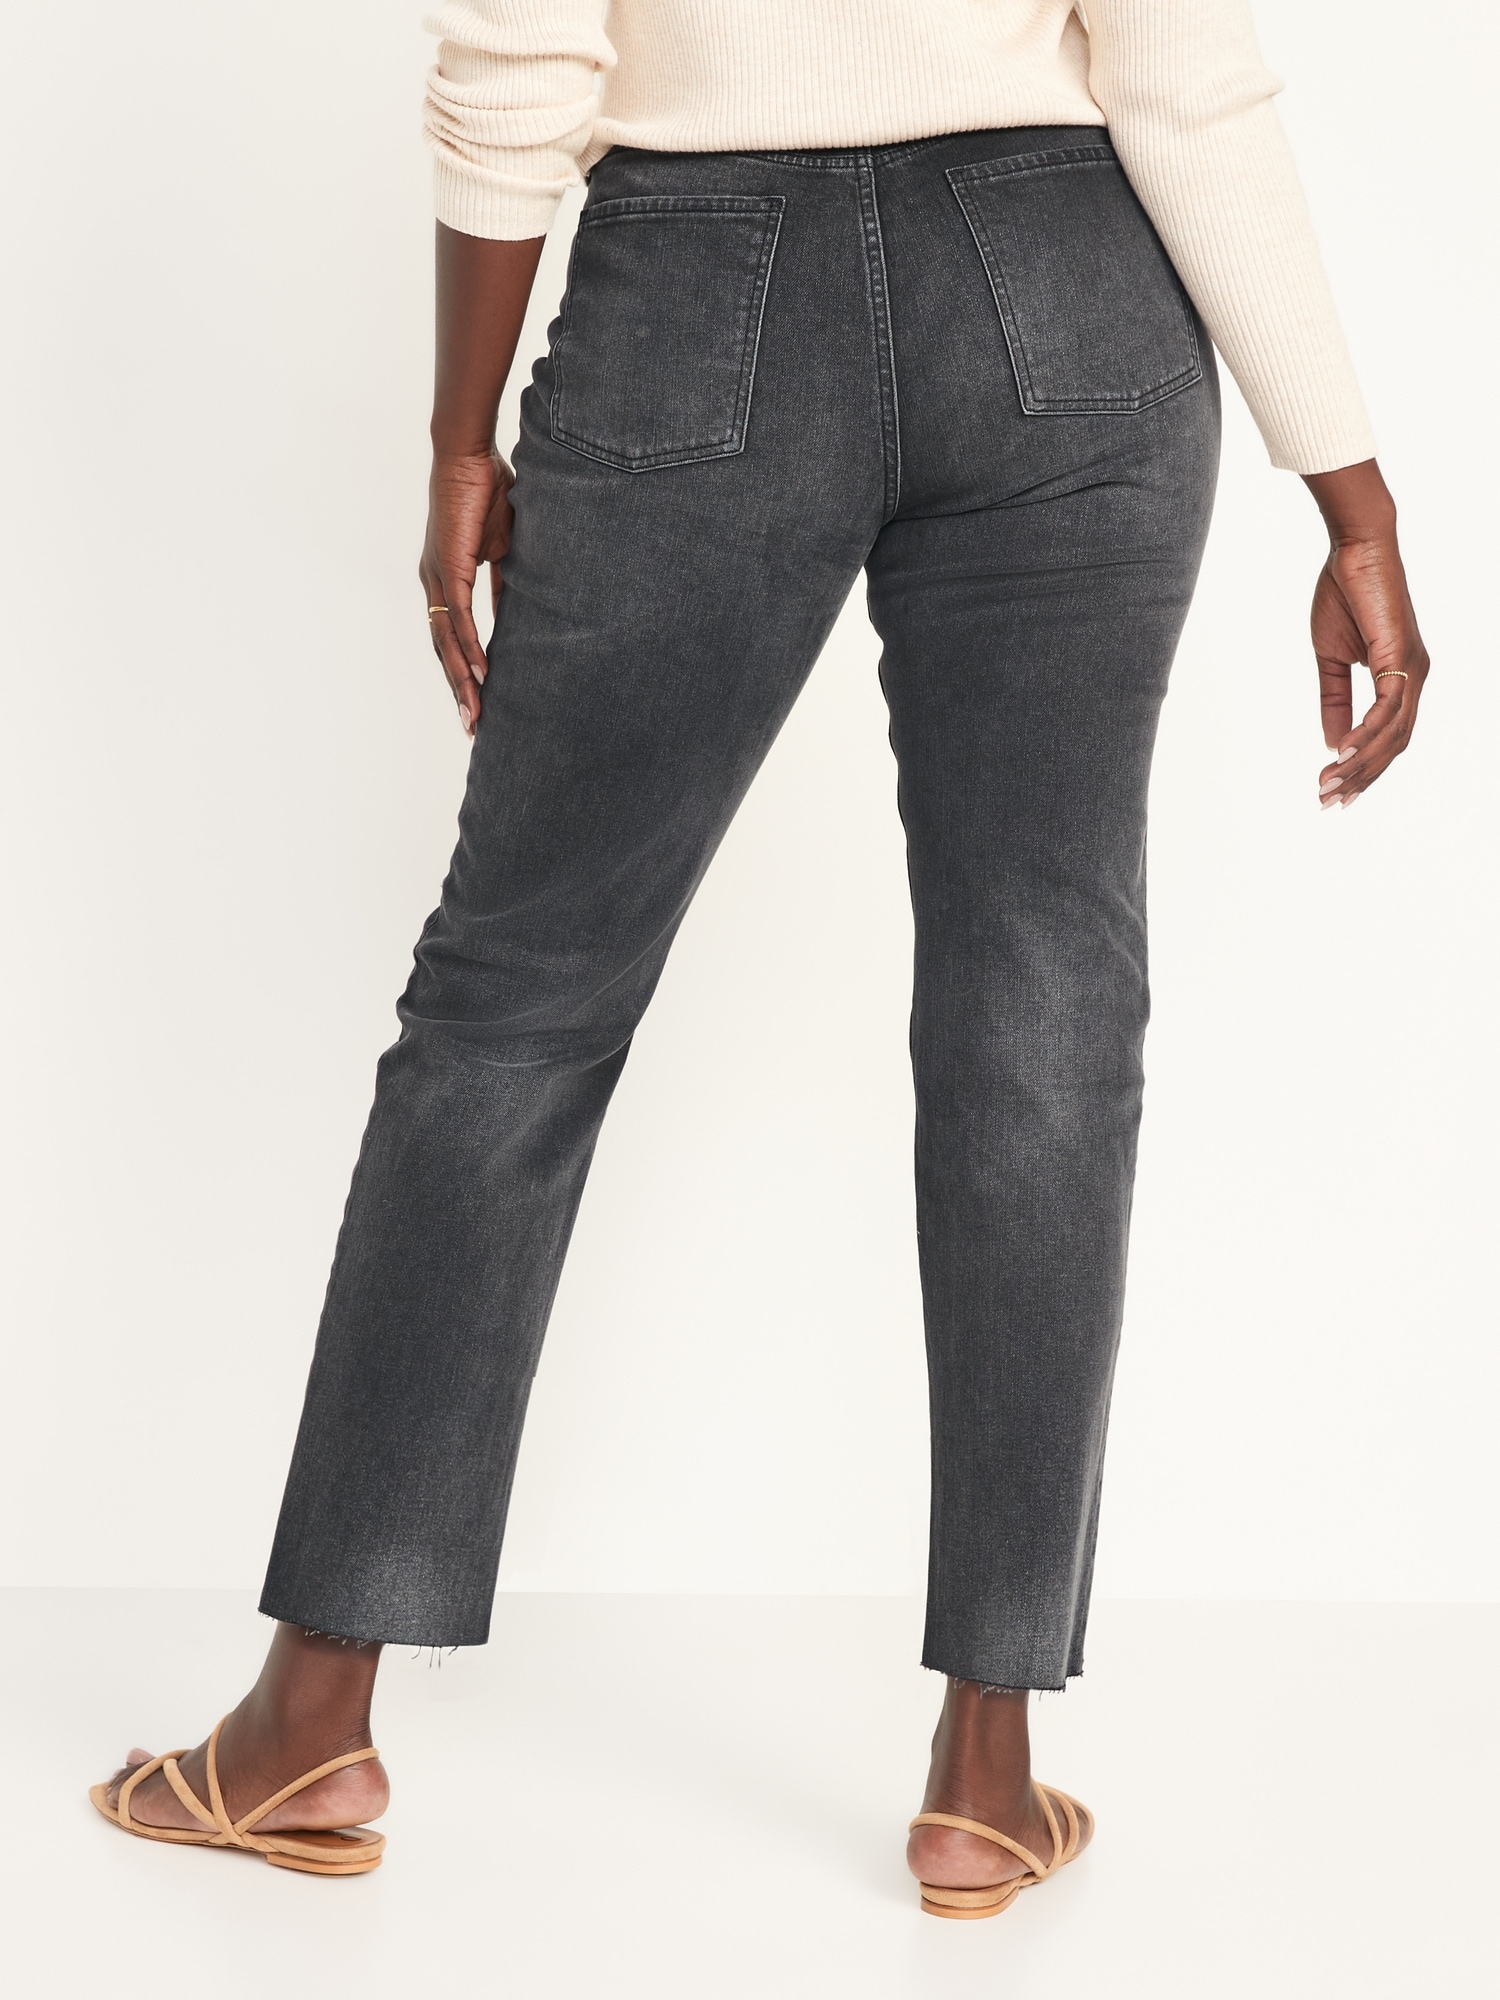 Topshop low-rise Baggy jeans in washed black